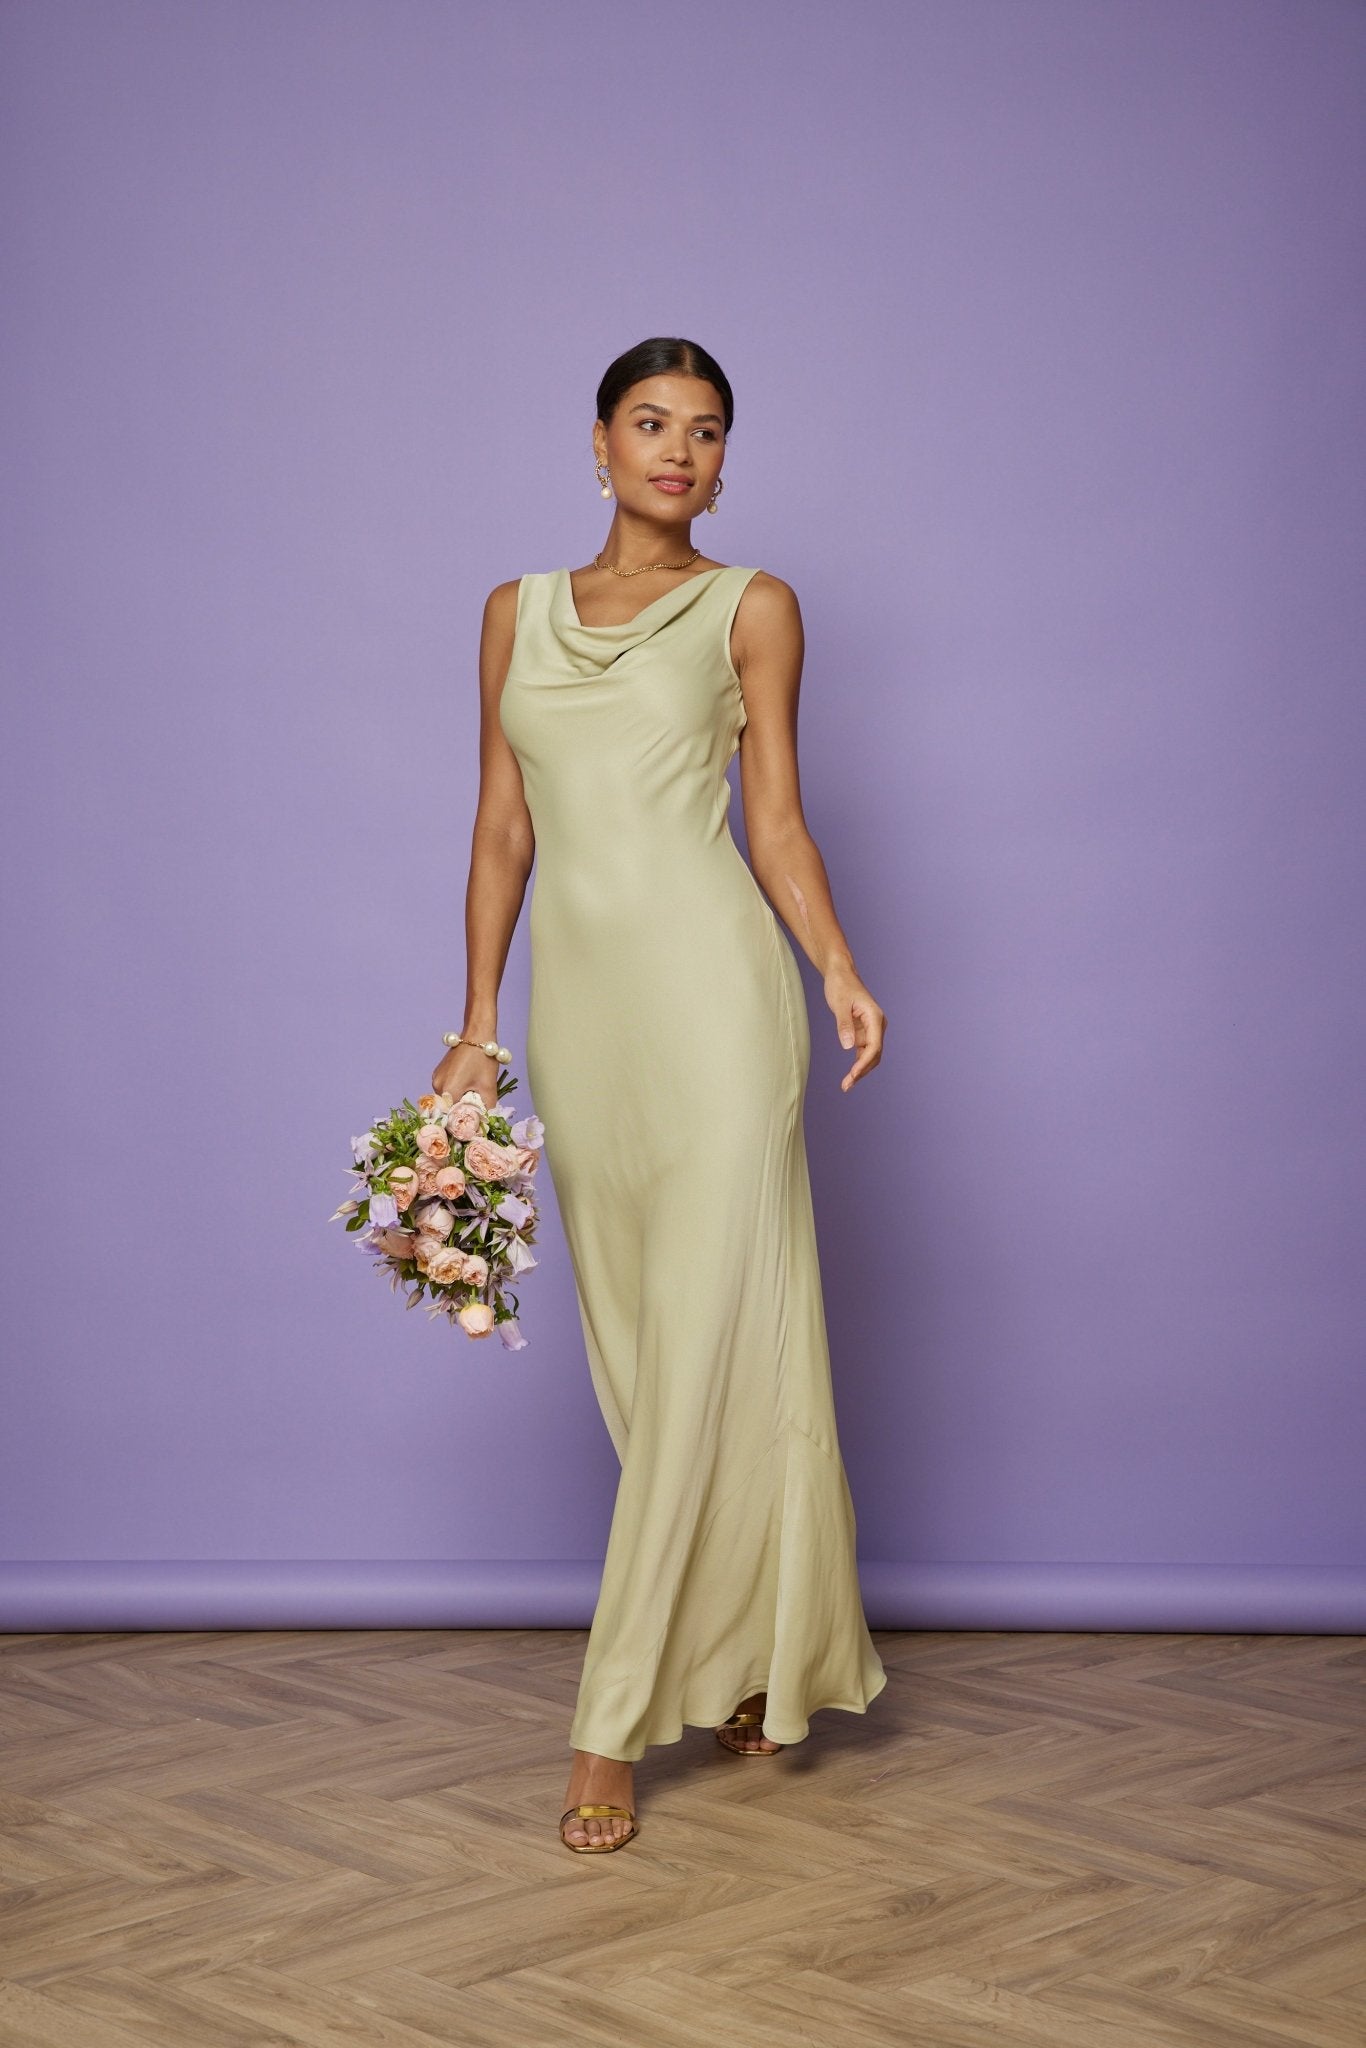 Pandy Satin Cowl Dress - Sage Green NEW - Maids to Measure